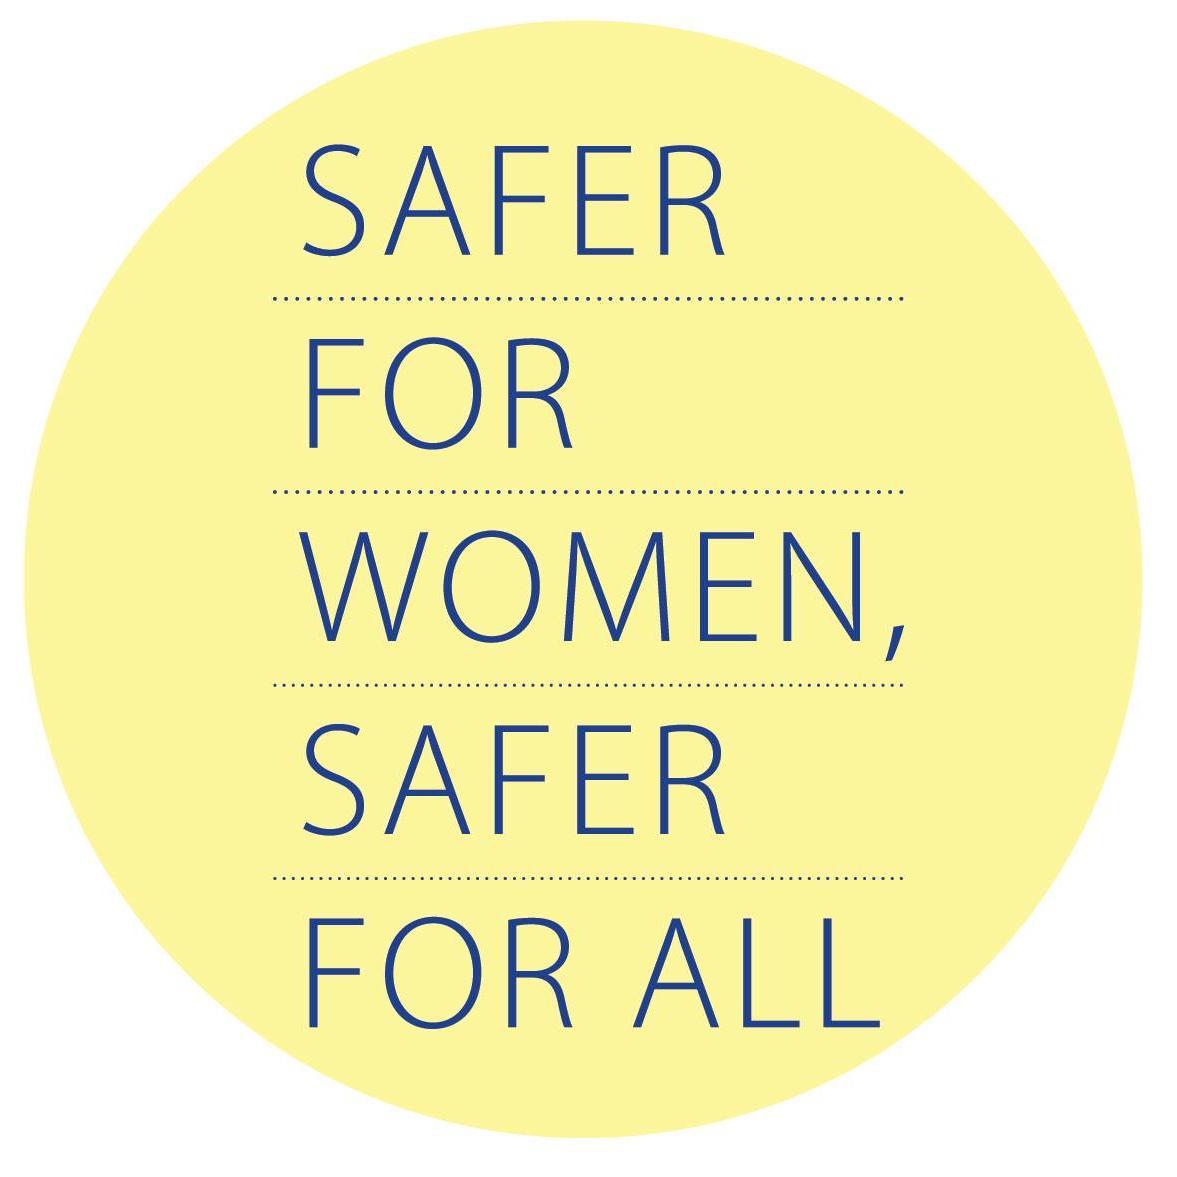 Women's Initiatives For Safer Environments provides services in #Ottawa promoting women's safety and working to prevent and end violence against women.